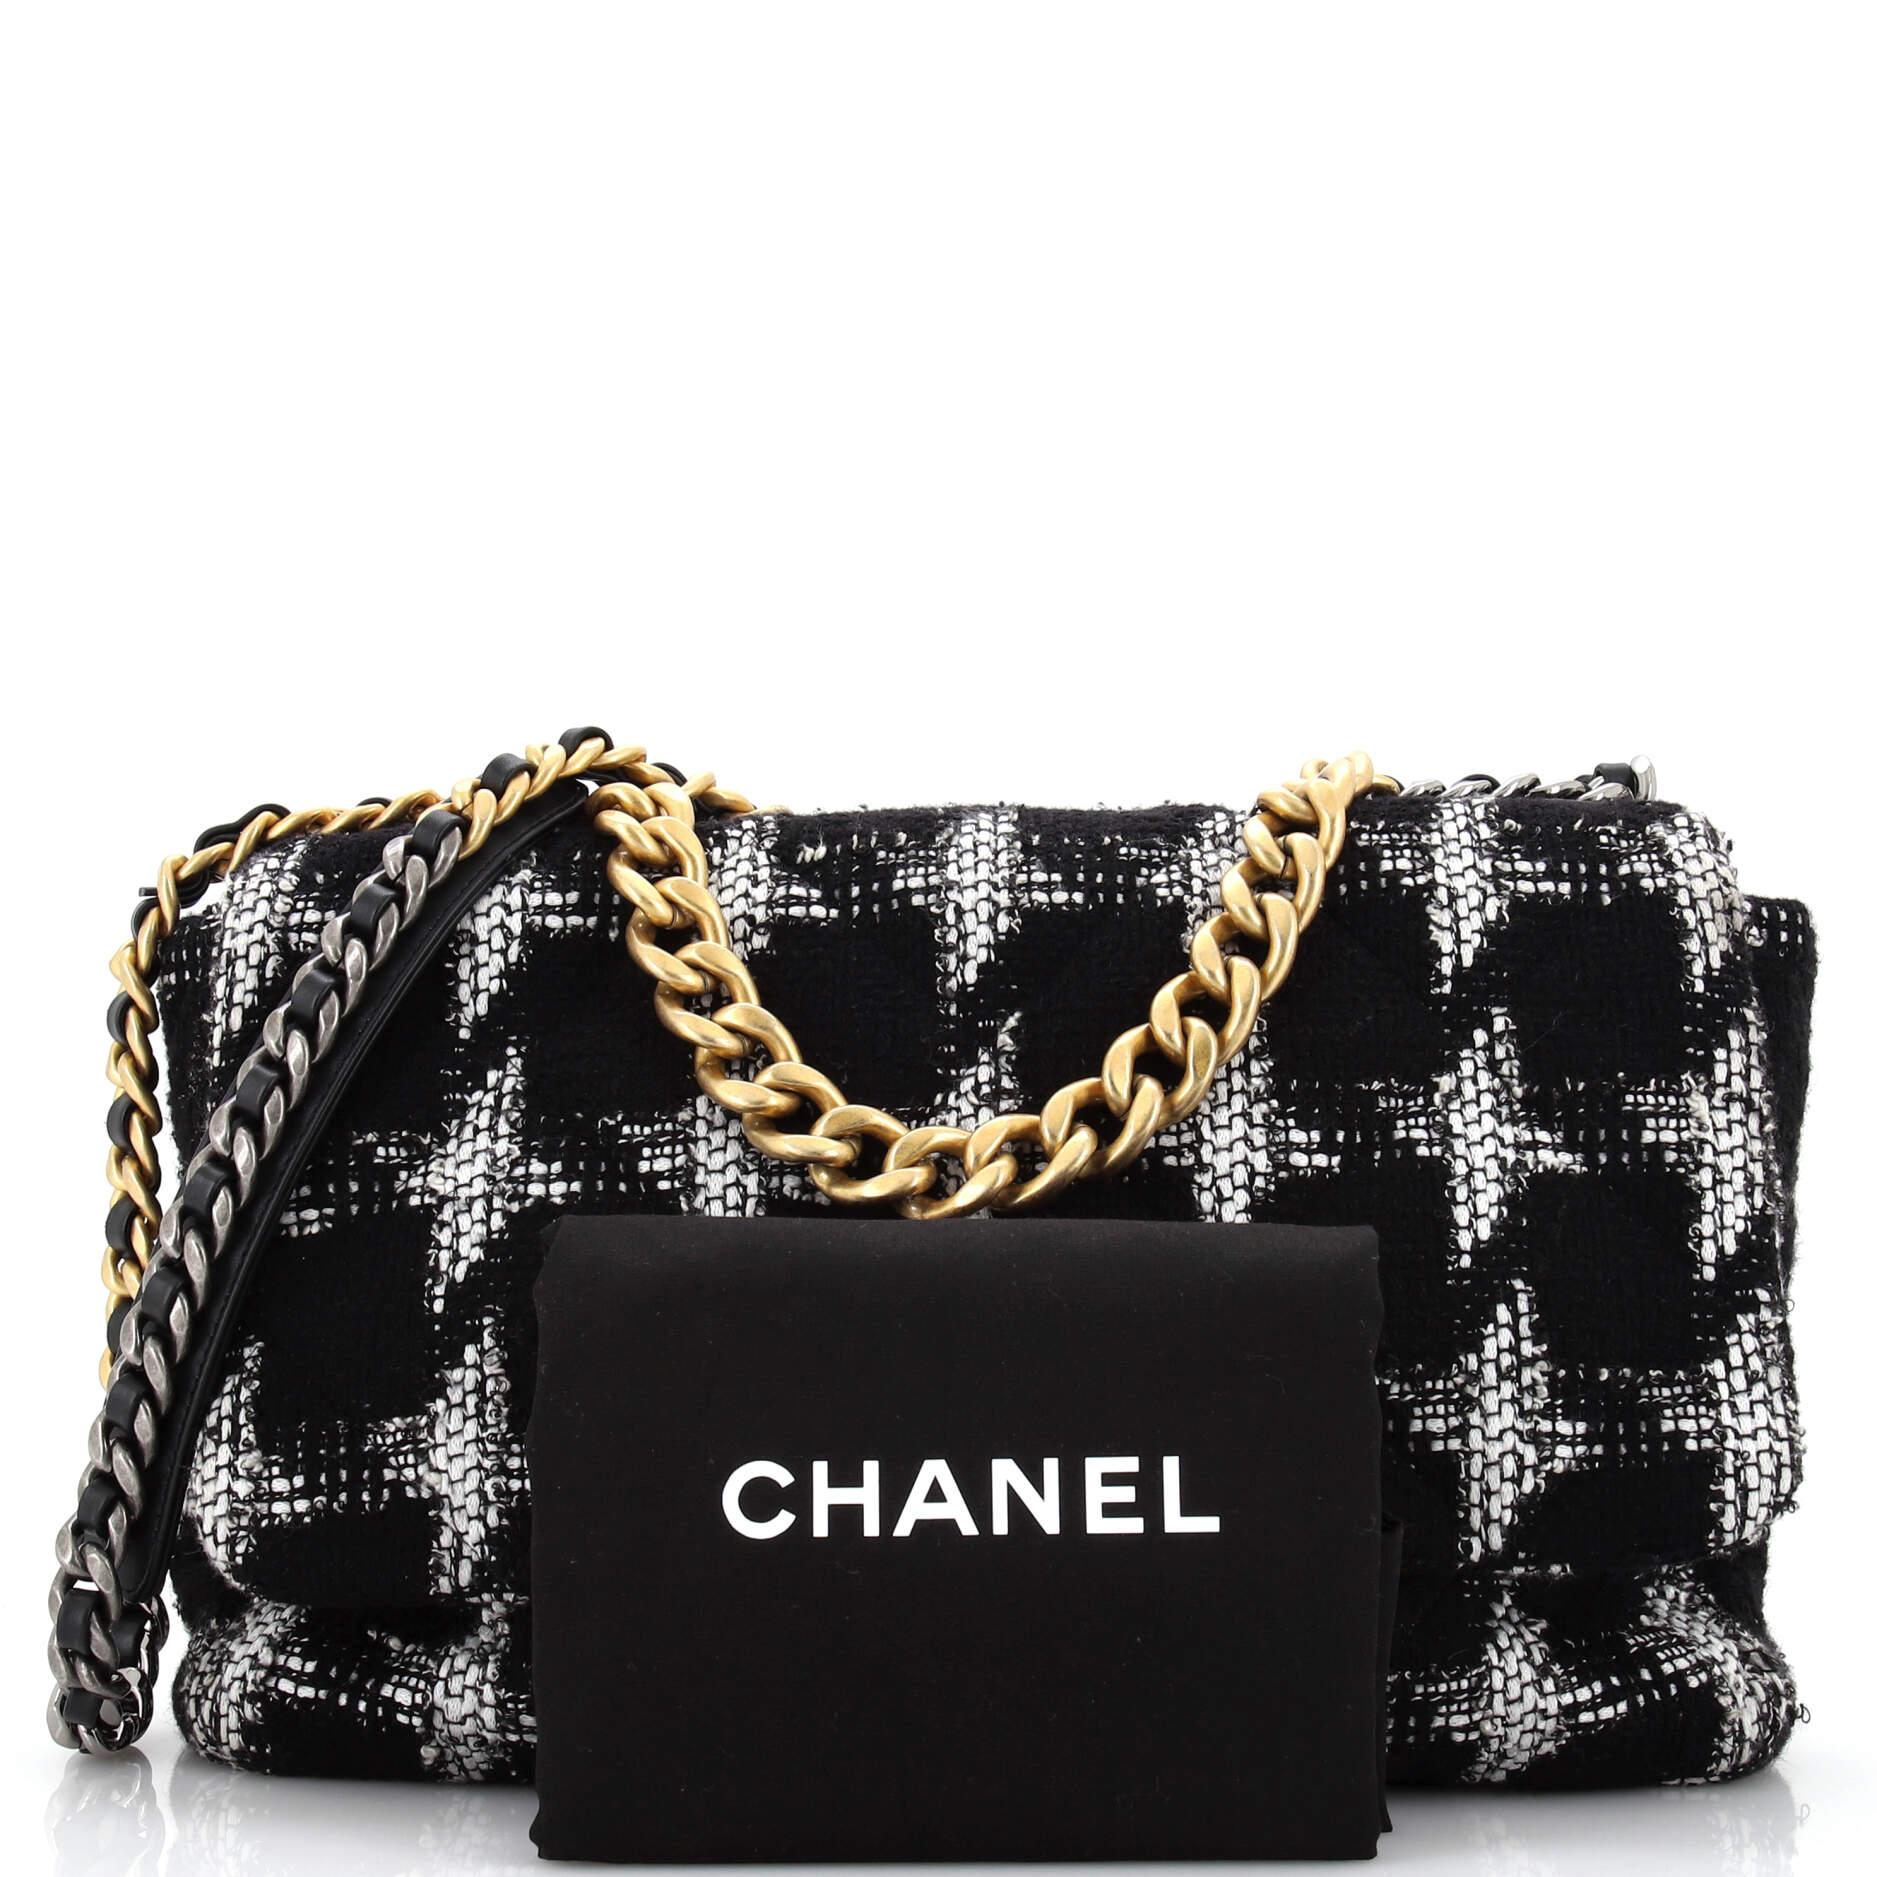 Chanel Handbags Houndstooth - 7 For Sale on 1stDibs  houndstooth chanel bag,  houndstooth bag chanel, chanel houndstooth